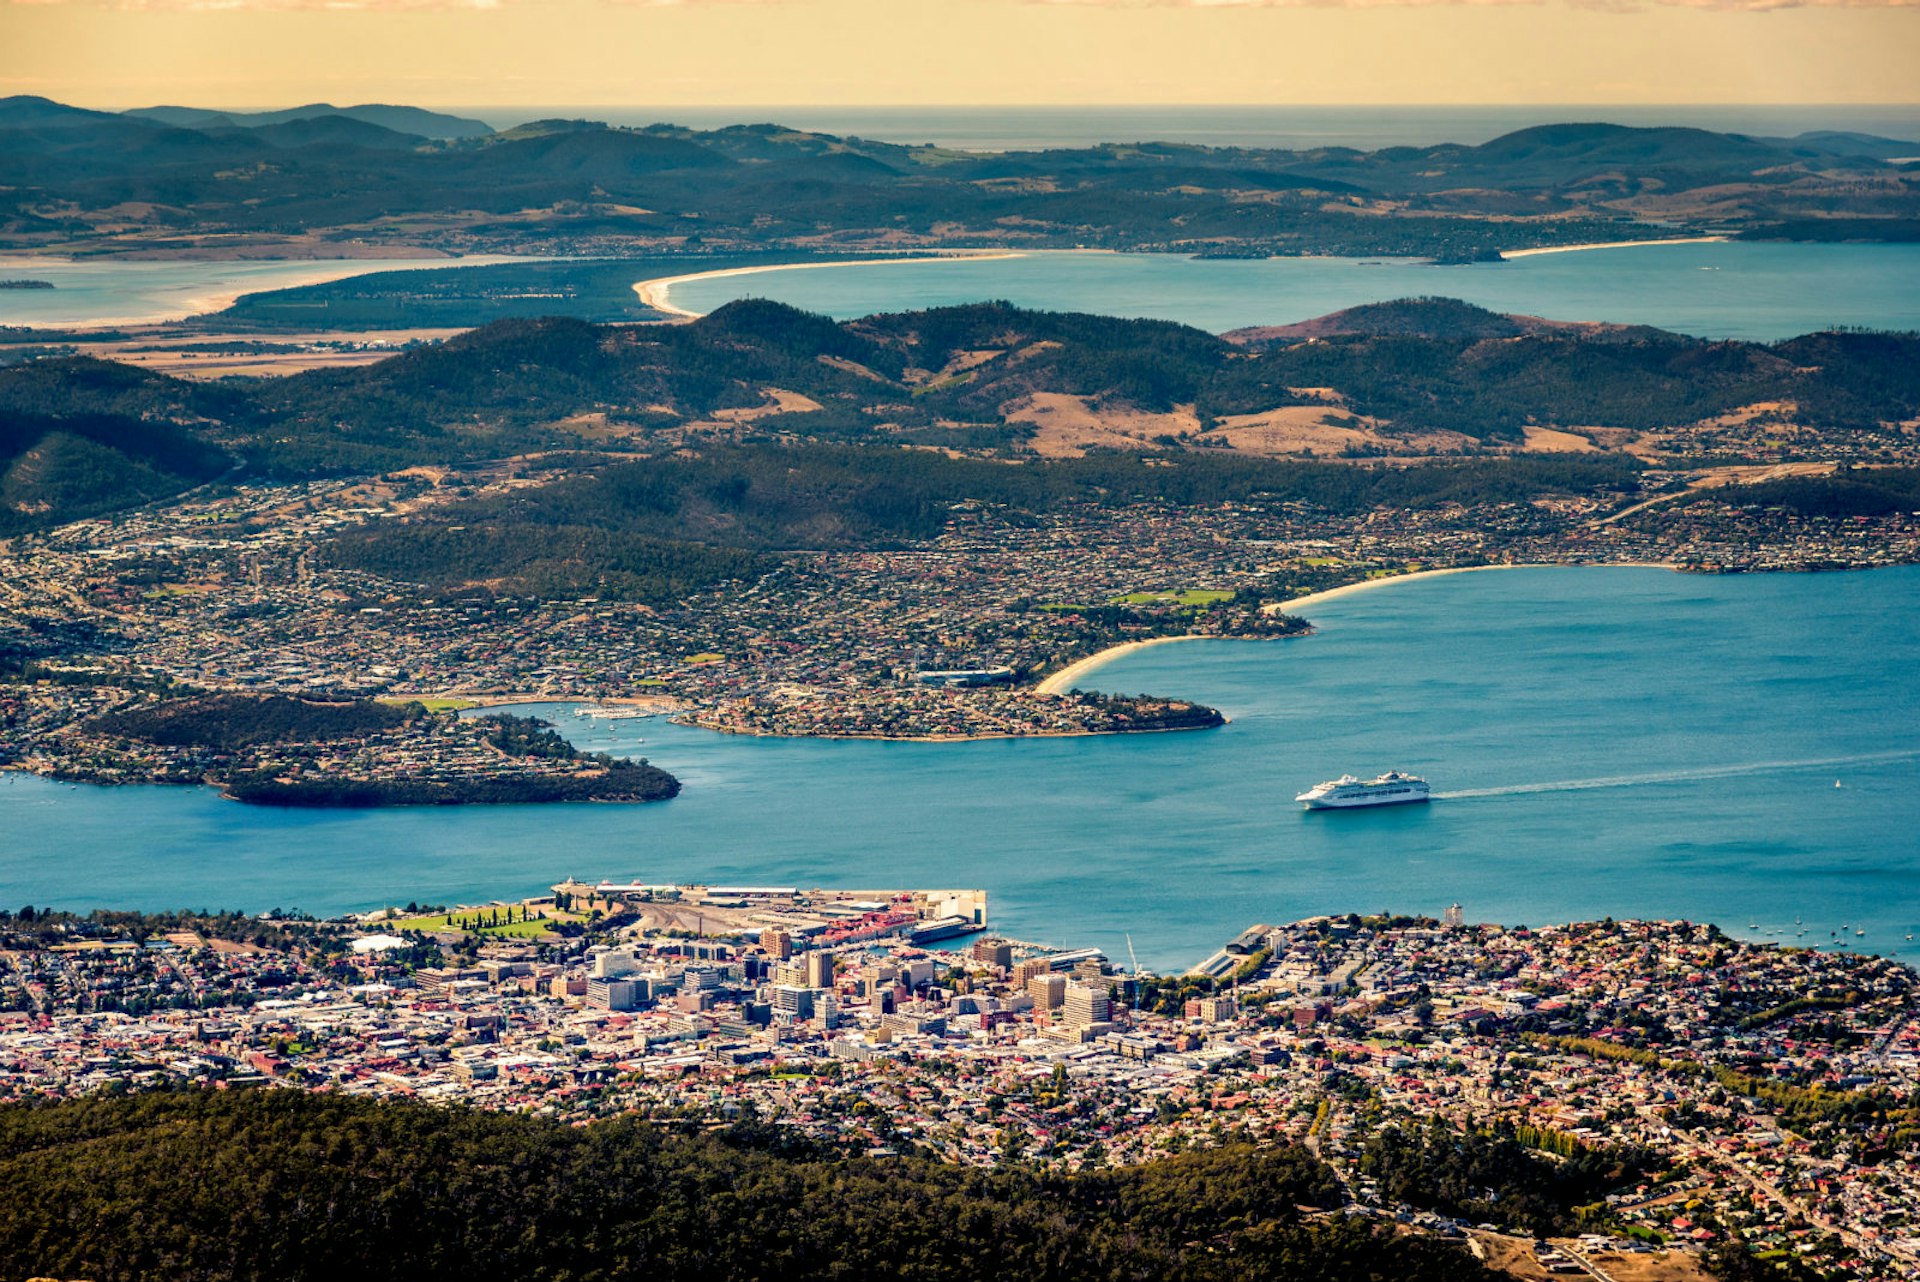 Tony Wheeler's top 10 cities - Hobart, as seen from the top of Mount Wellington, Tasmania © Posnov / Getty Images